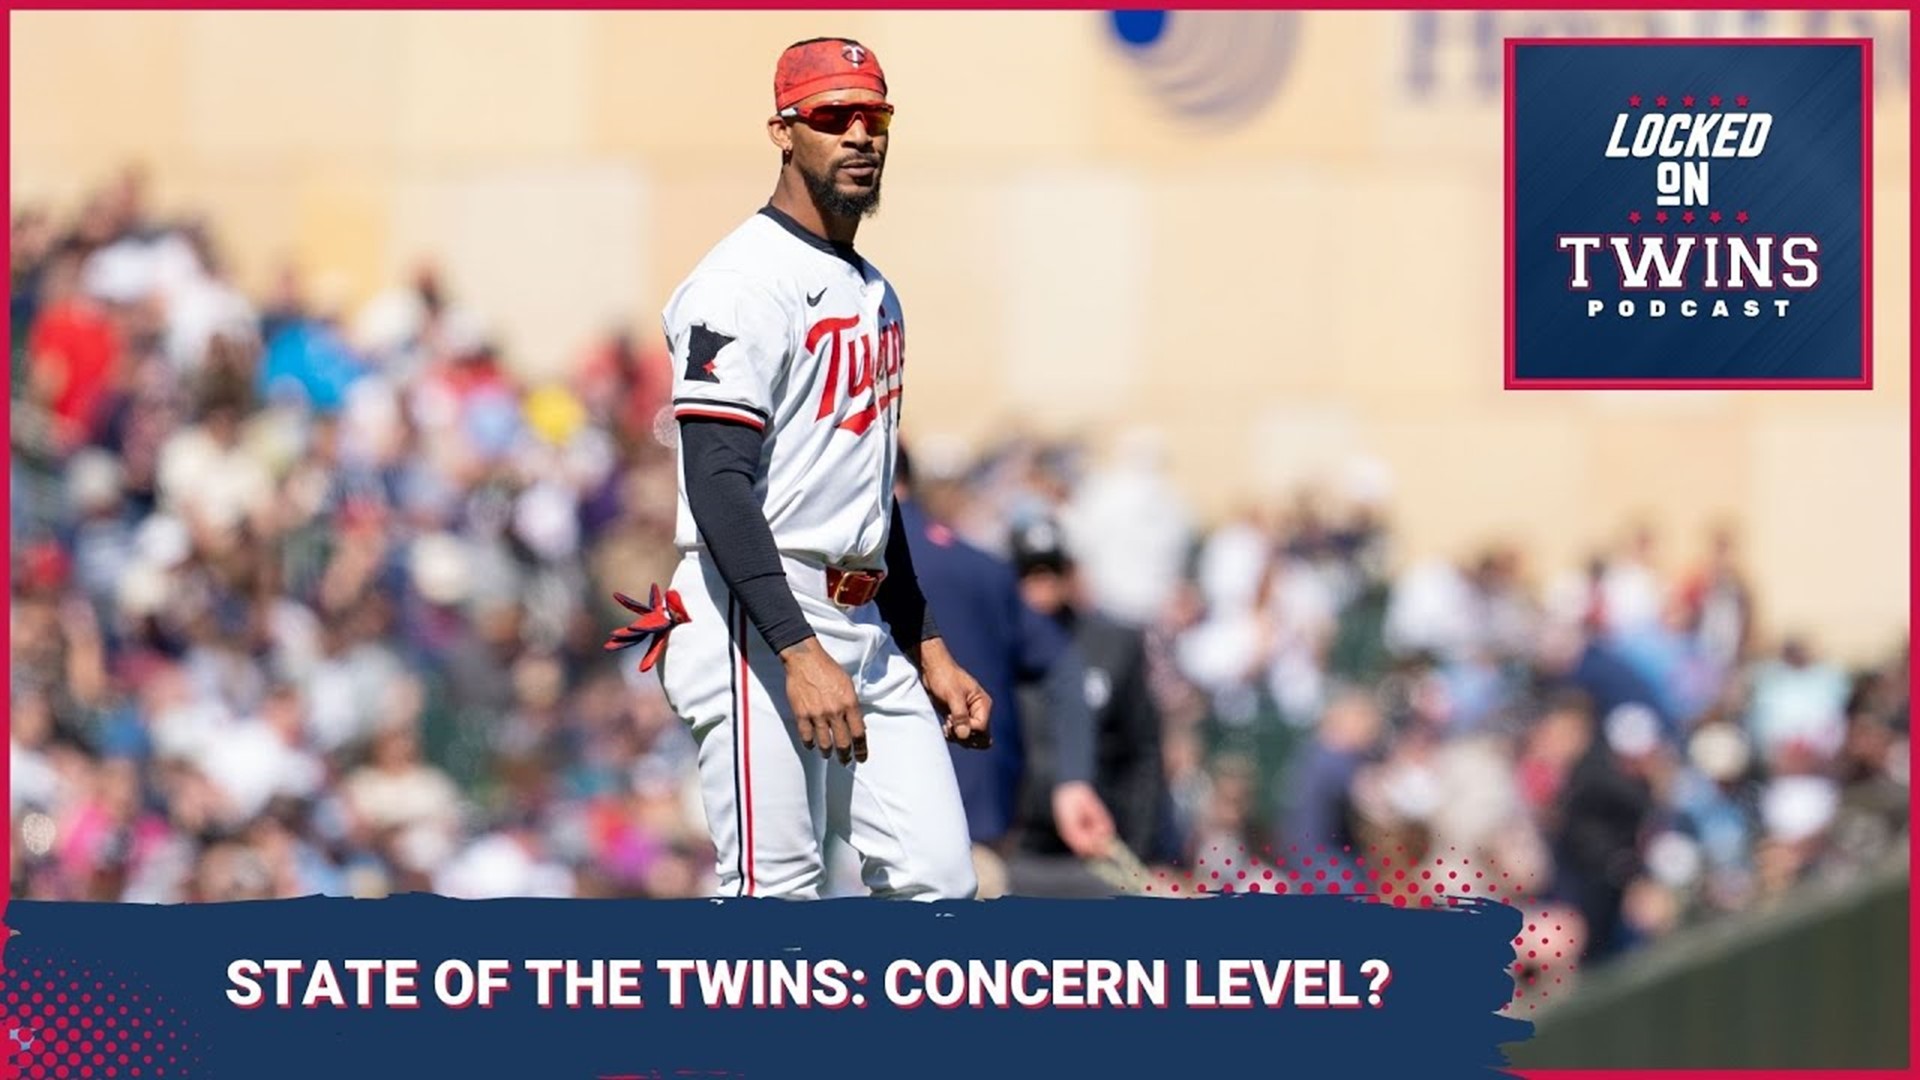 State of the Twins Address. How Concerning is the 3-4 Start?